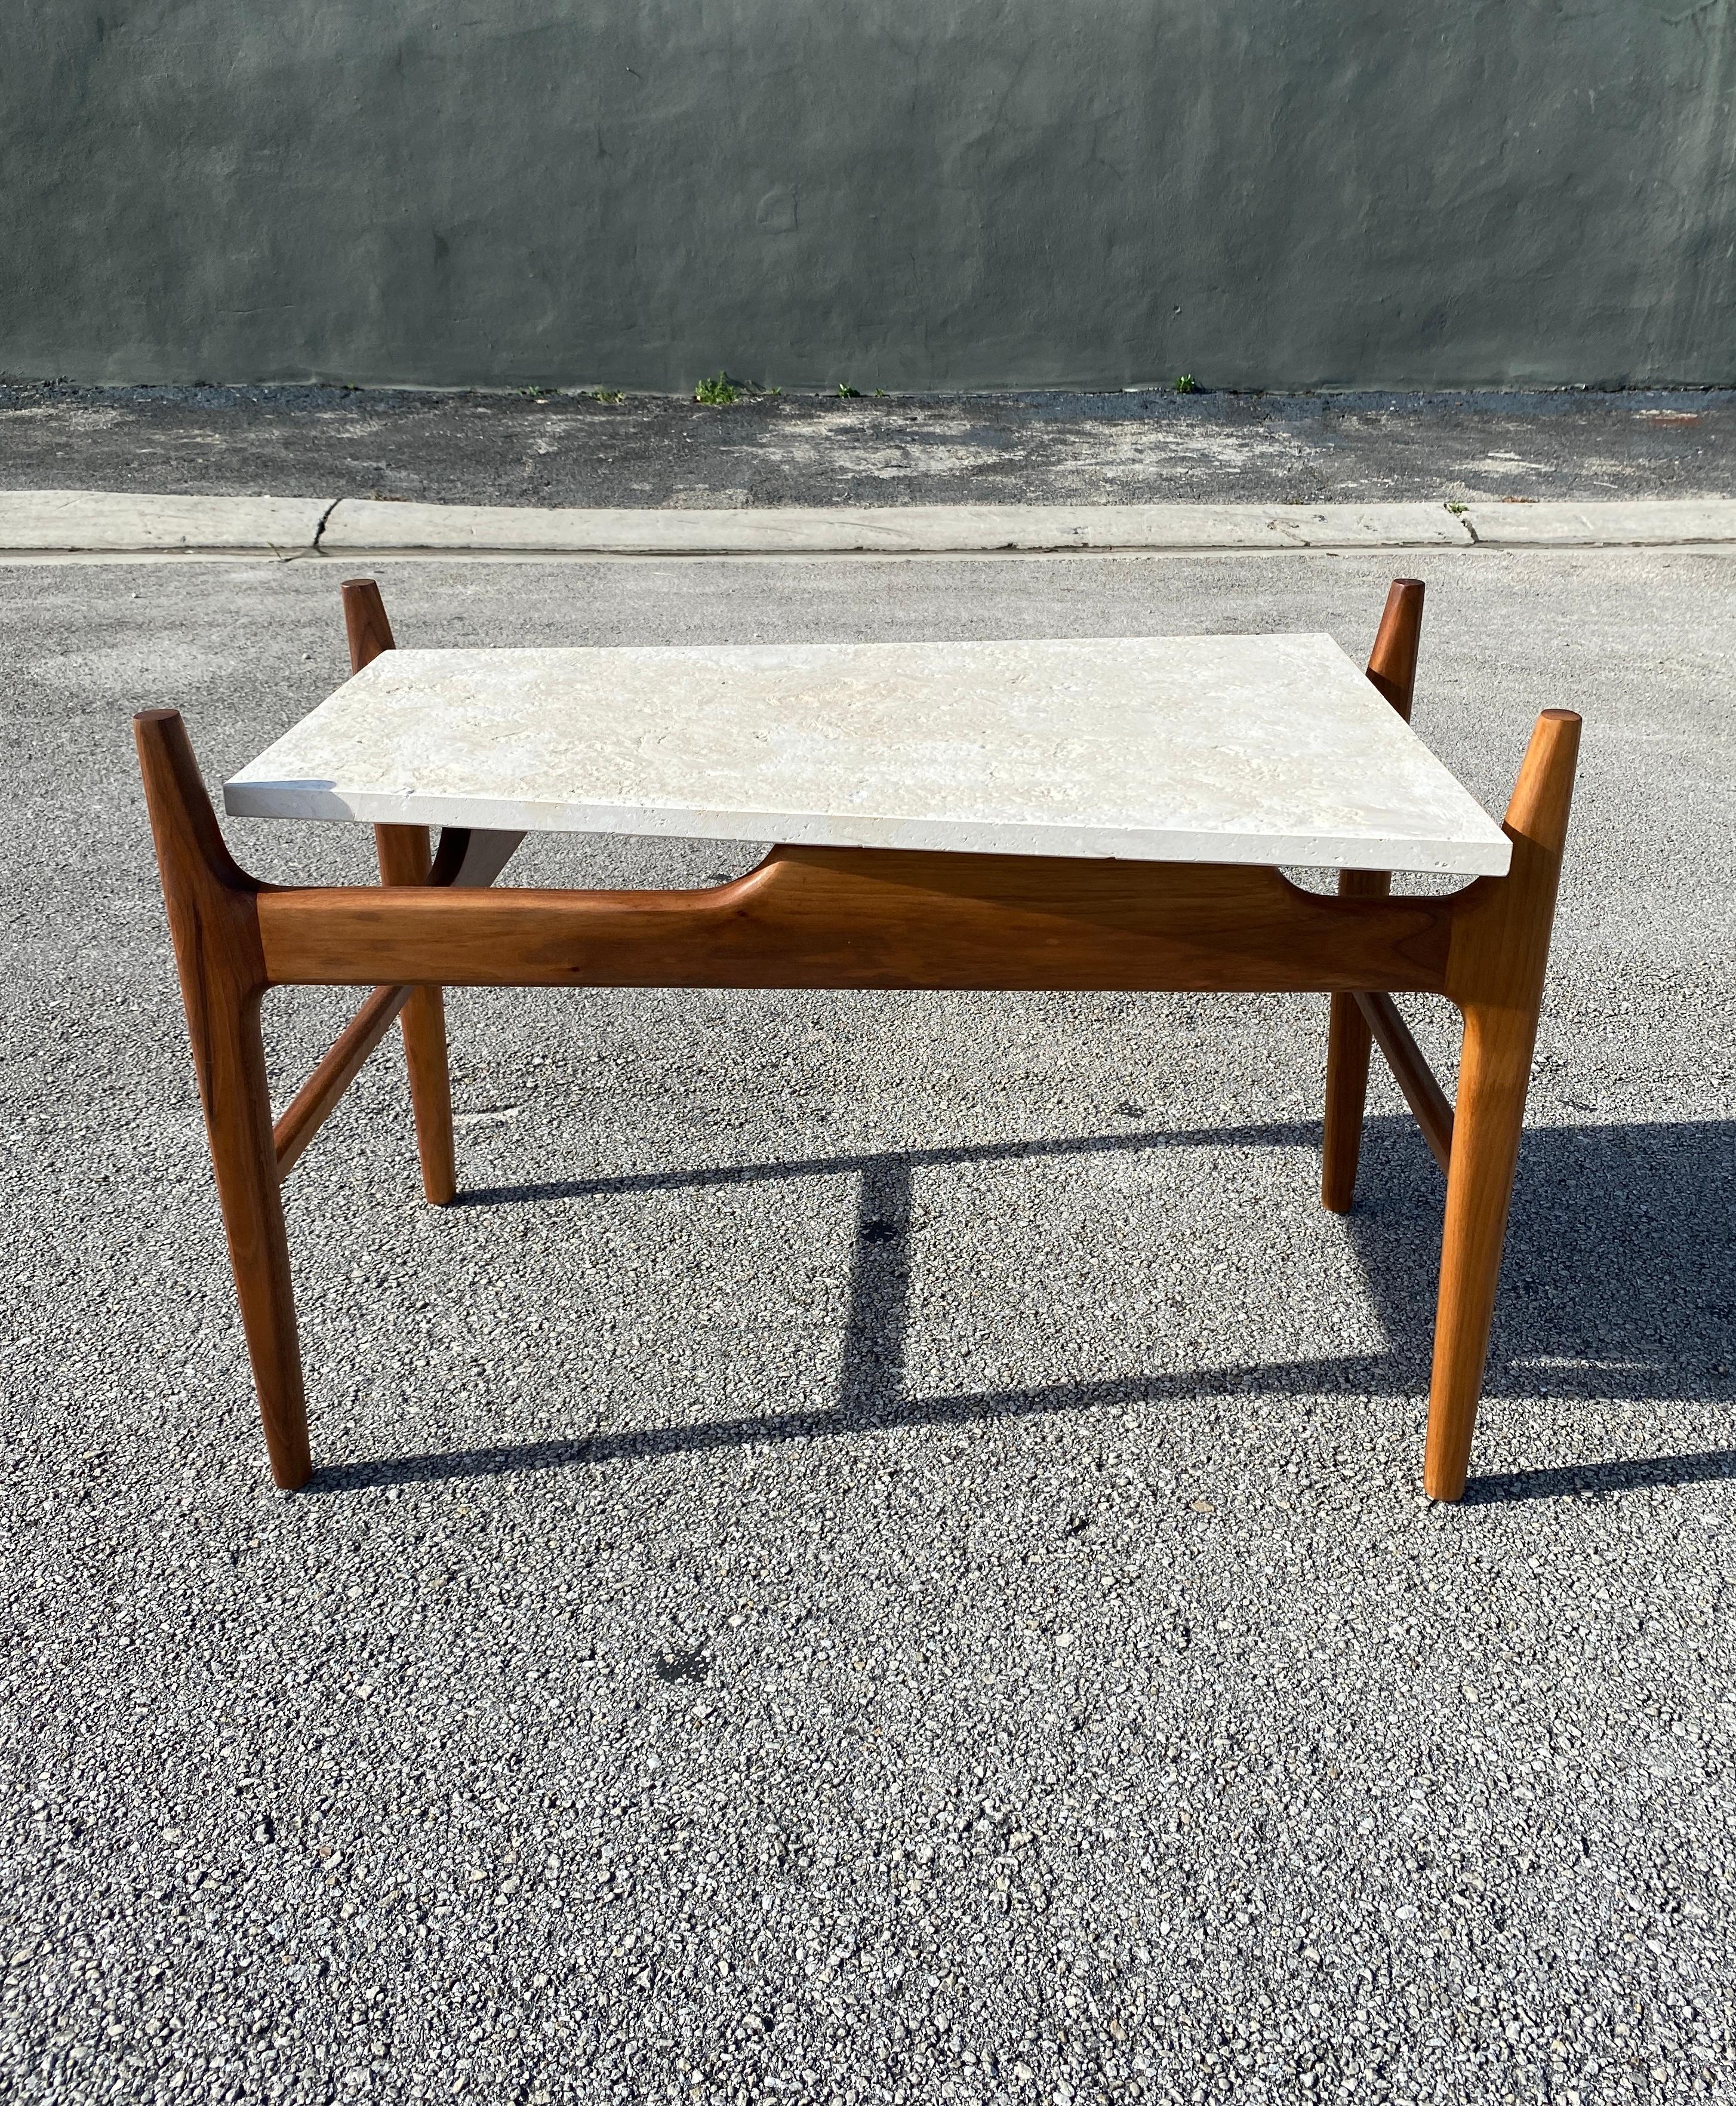 Rare vintage trapeze coral stone side table by Harvey Probber. Great combination of walnut wood and stone. Cantilever top. Circa 1960s.

33”L x 20.5”W x 21.5”H on widest side. Shortest side measures 16.5”W.

Stone surface height 19”.